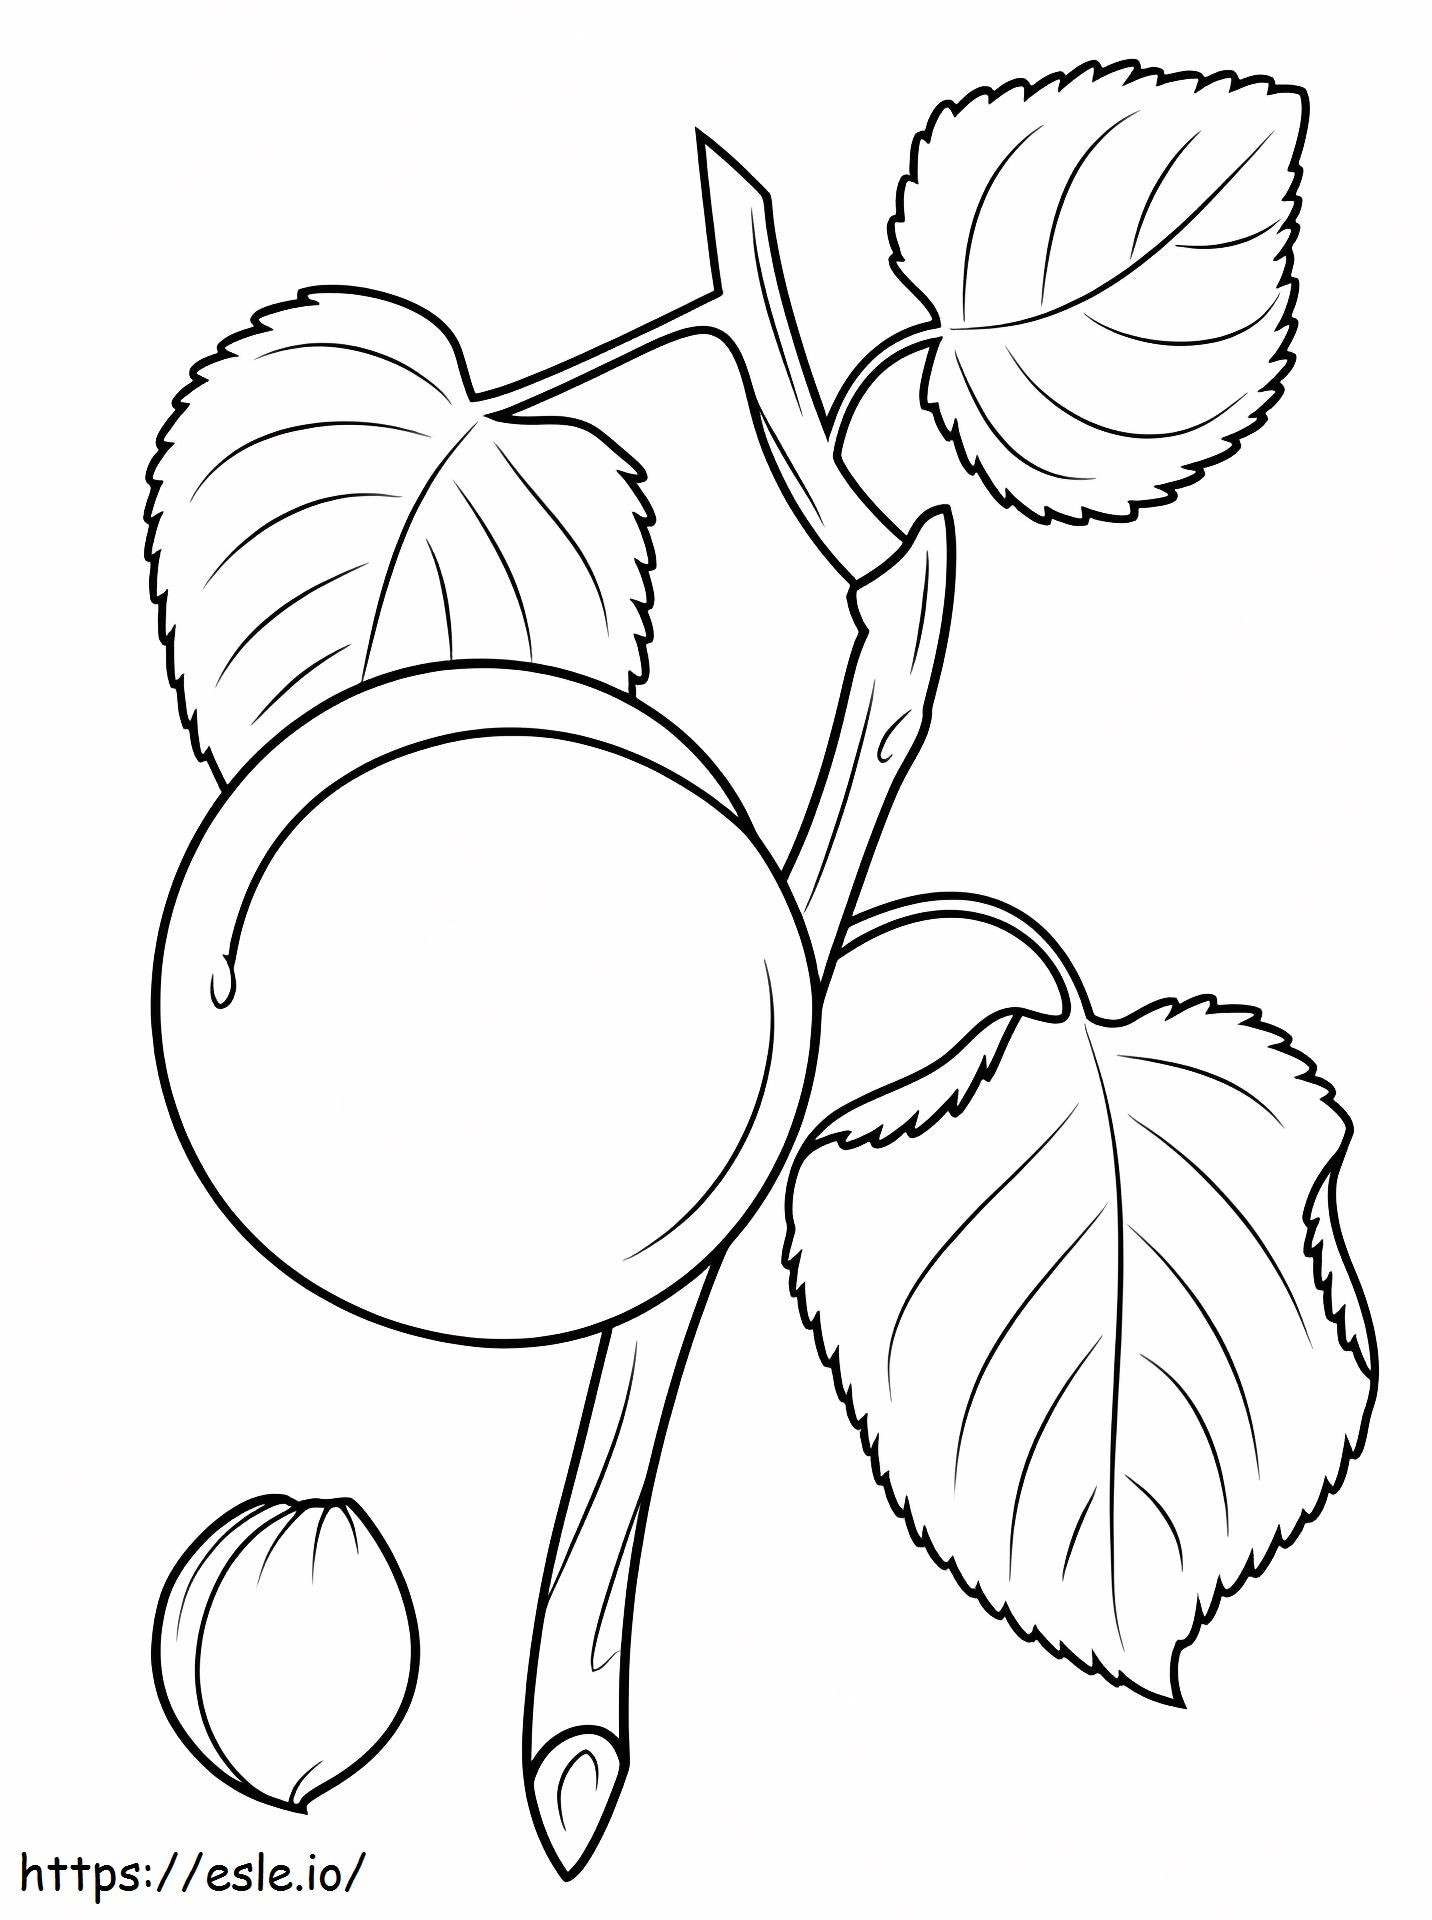 Apricot Branch coloring page